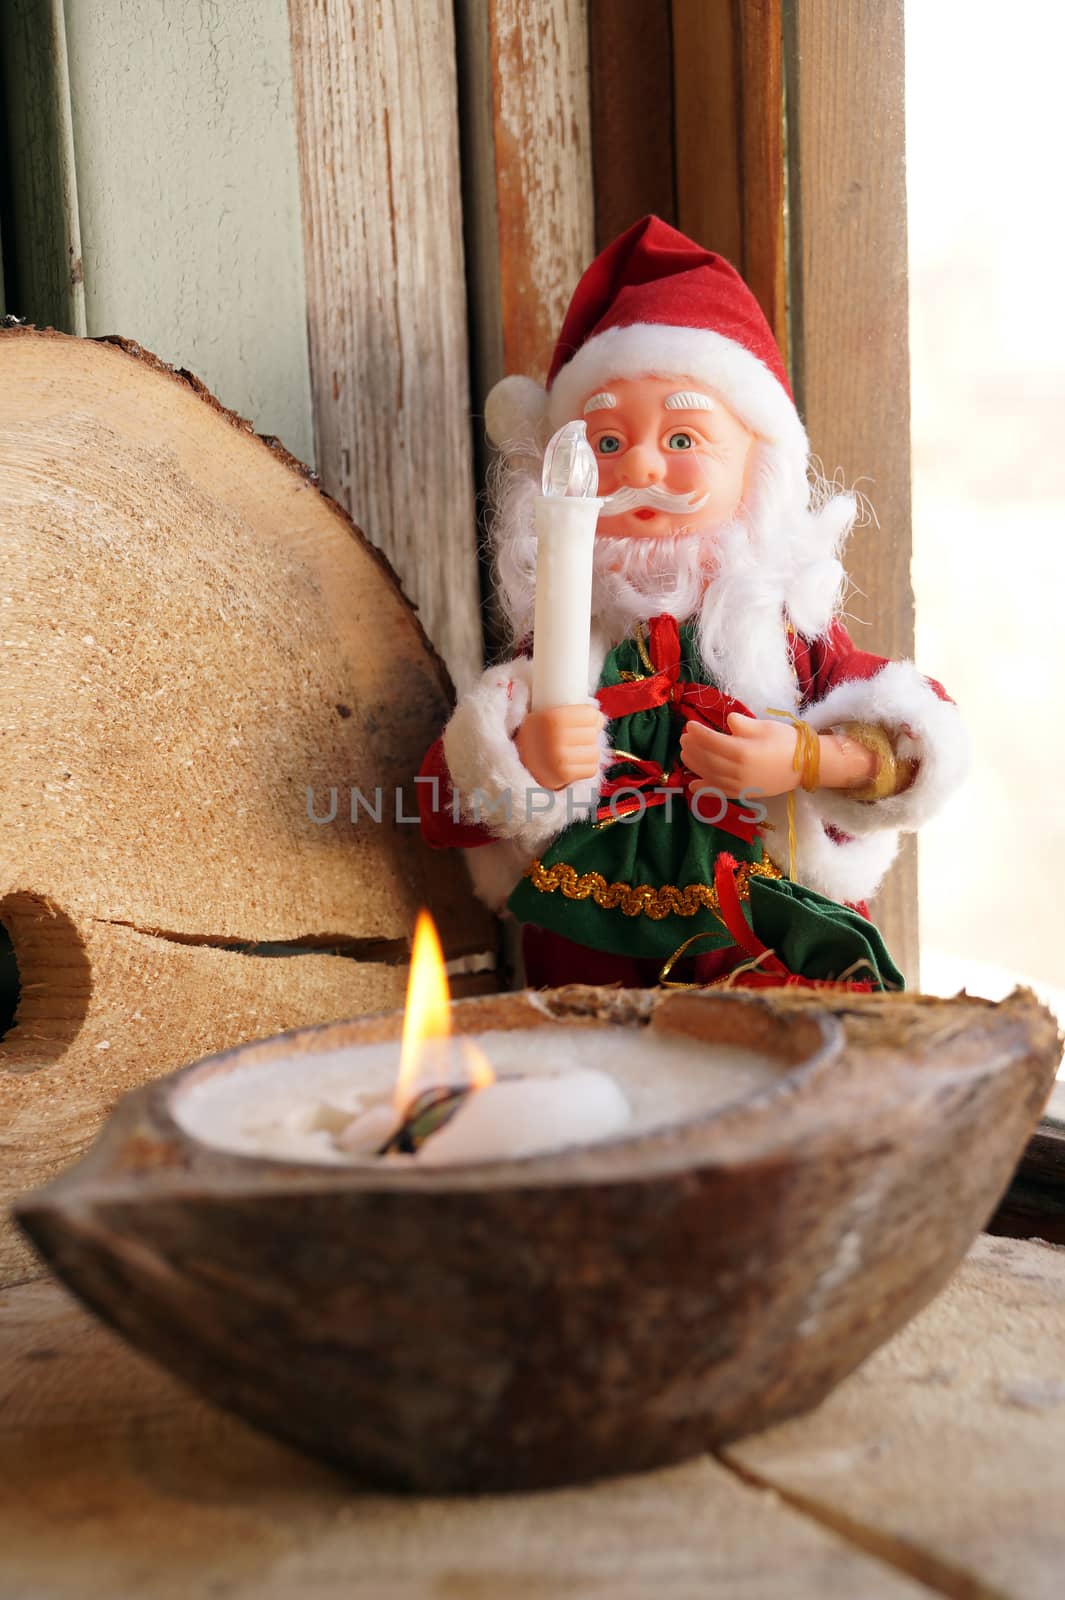 Santa Claus and a candle in a coconut by Vadimdem